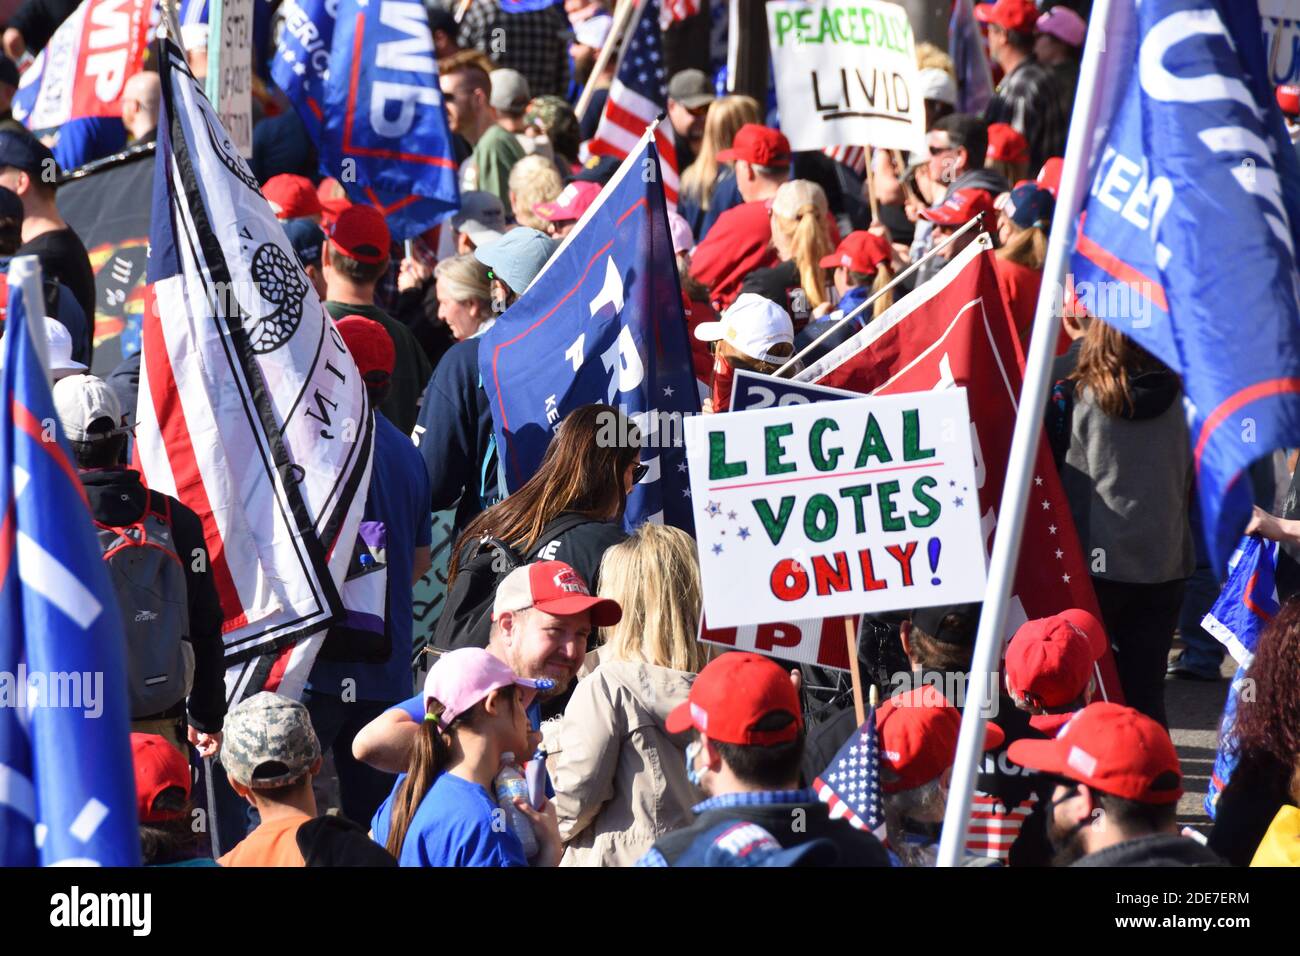 Washington DC. Nov 14, 2020. Million Maga March. Trump’s supporters with political sign “Legal votes only” and flags standing at Freedom Plaza. Stock Photo